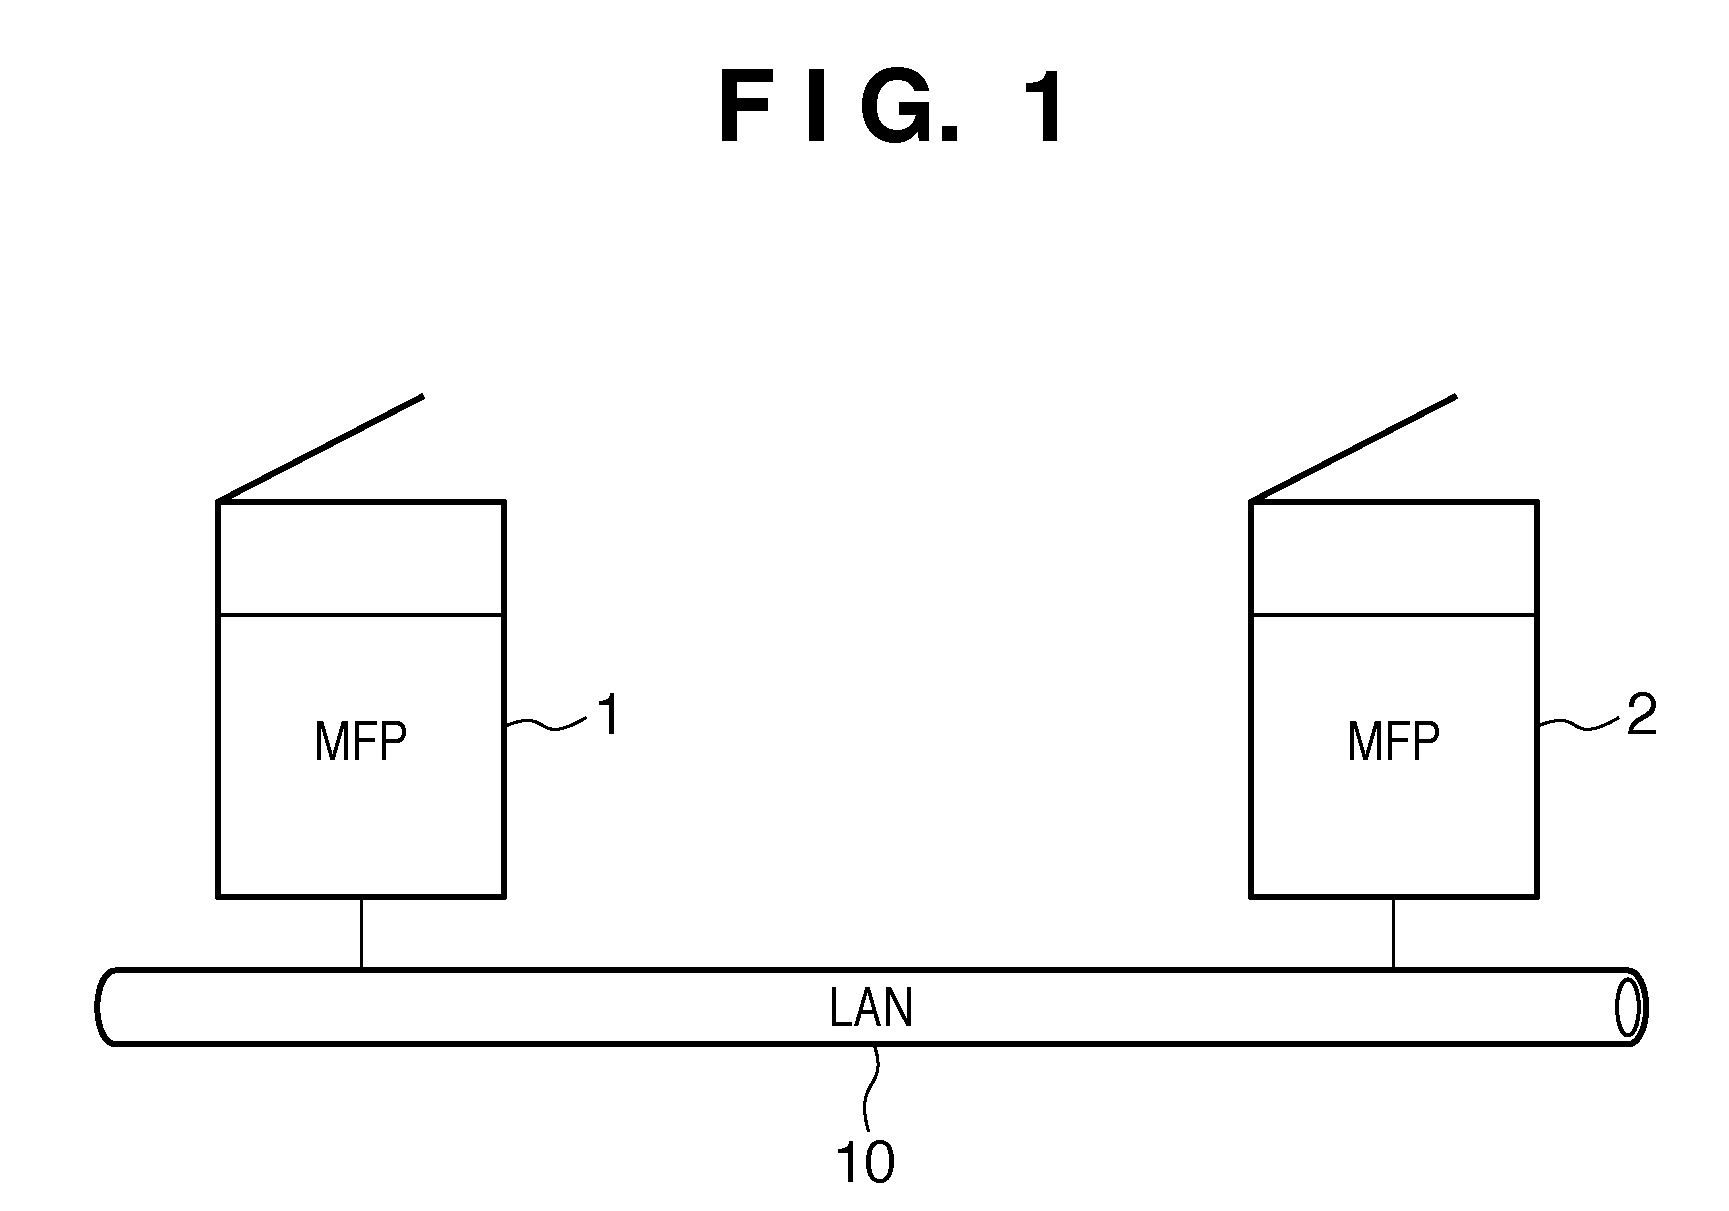 Image processing method and apparatus for performing notification of the presence of a file whose metadata is not generated when performing retrieval processing